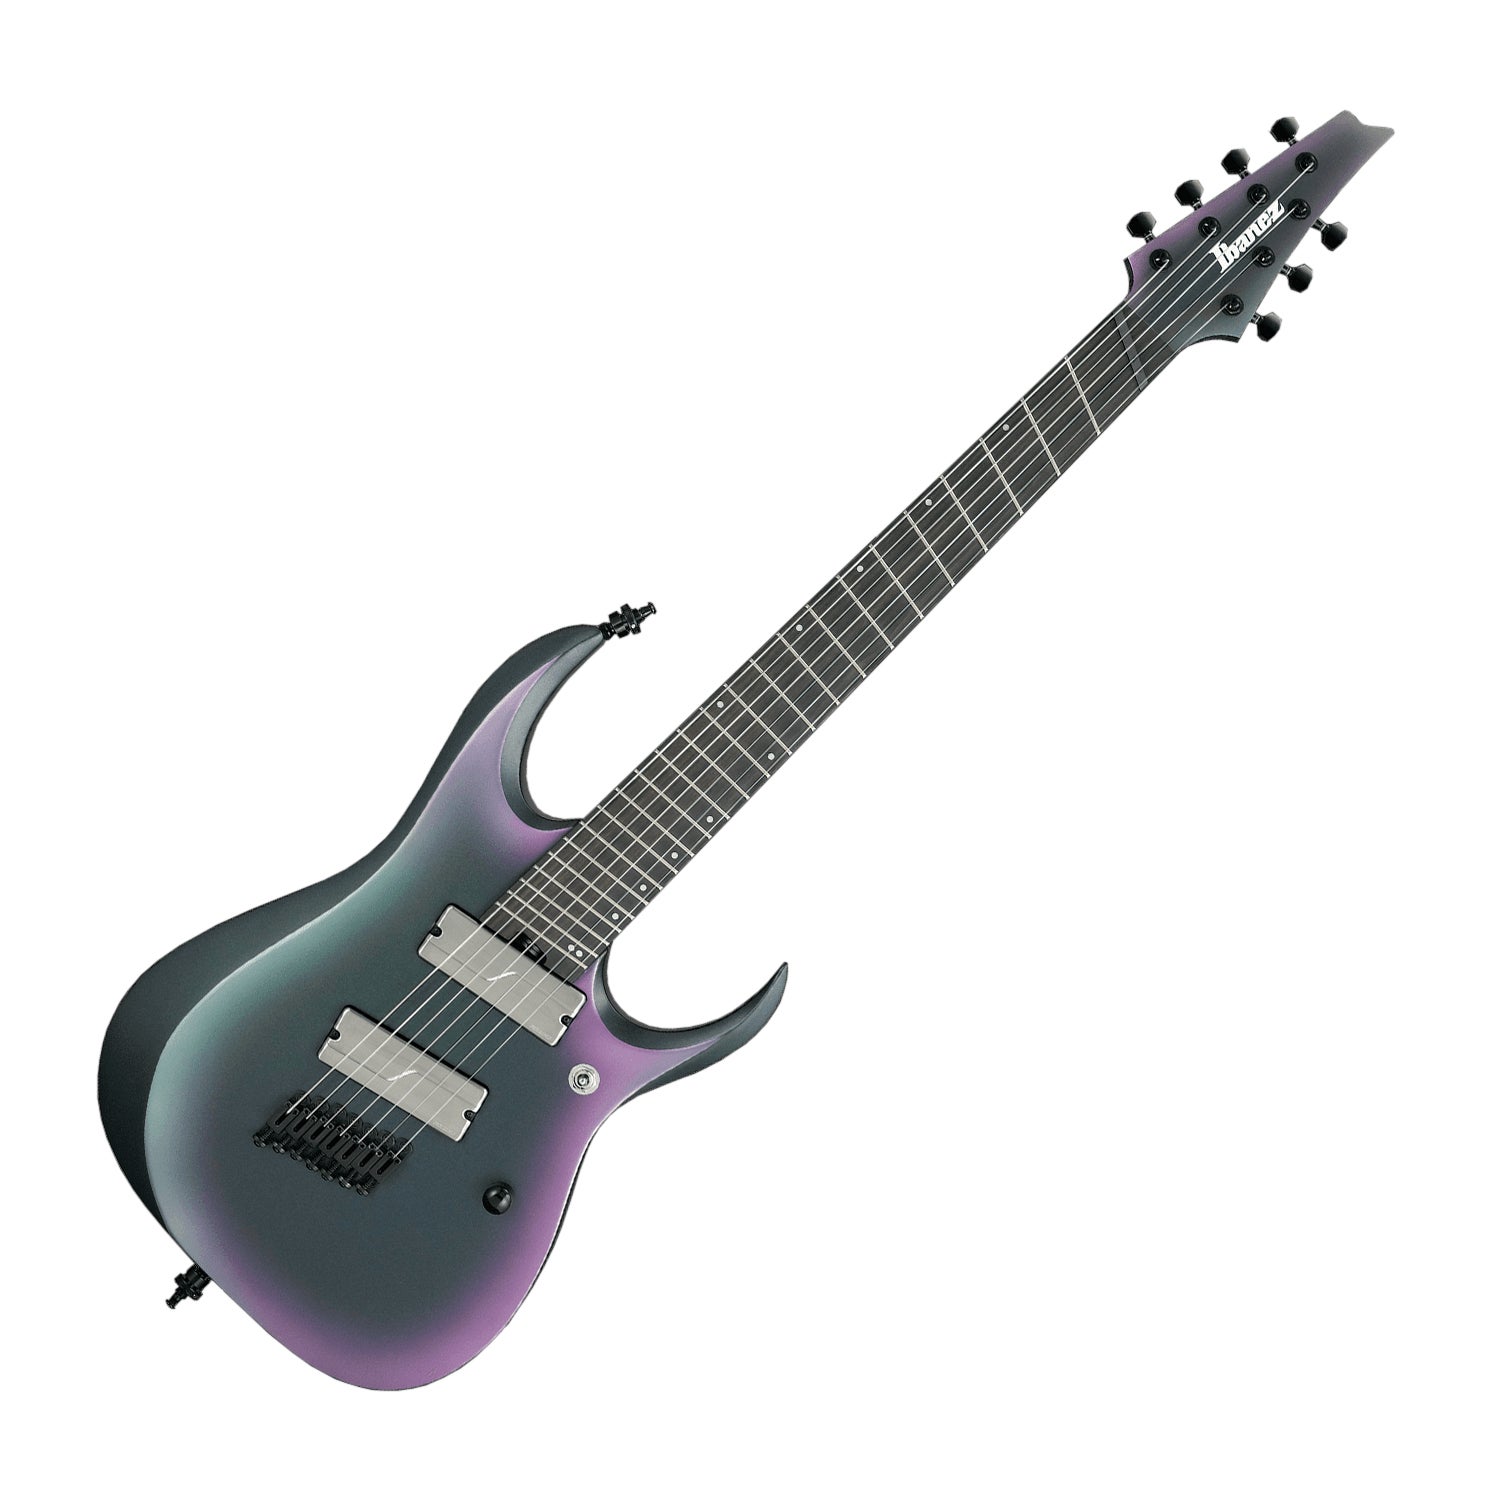 Ibanez Rgd71alms Bam Axion Rgd 7 String Electric Guitar Multi ...